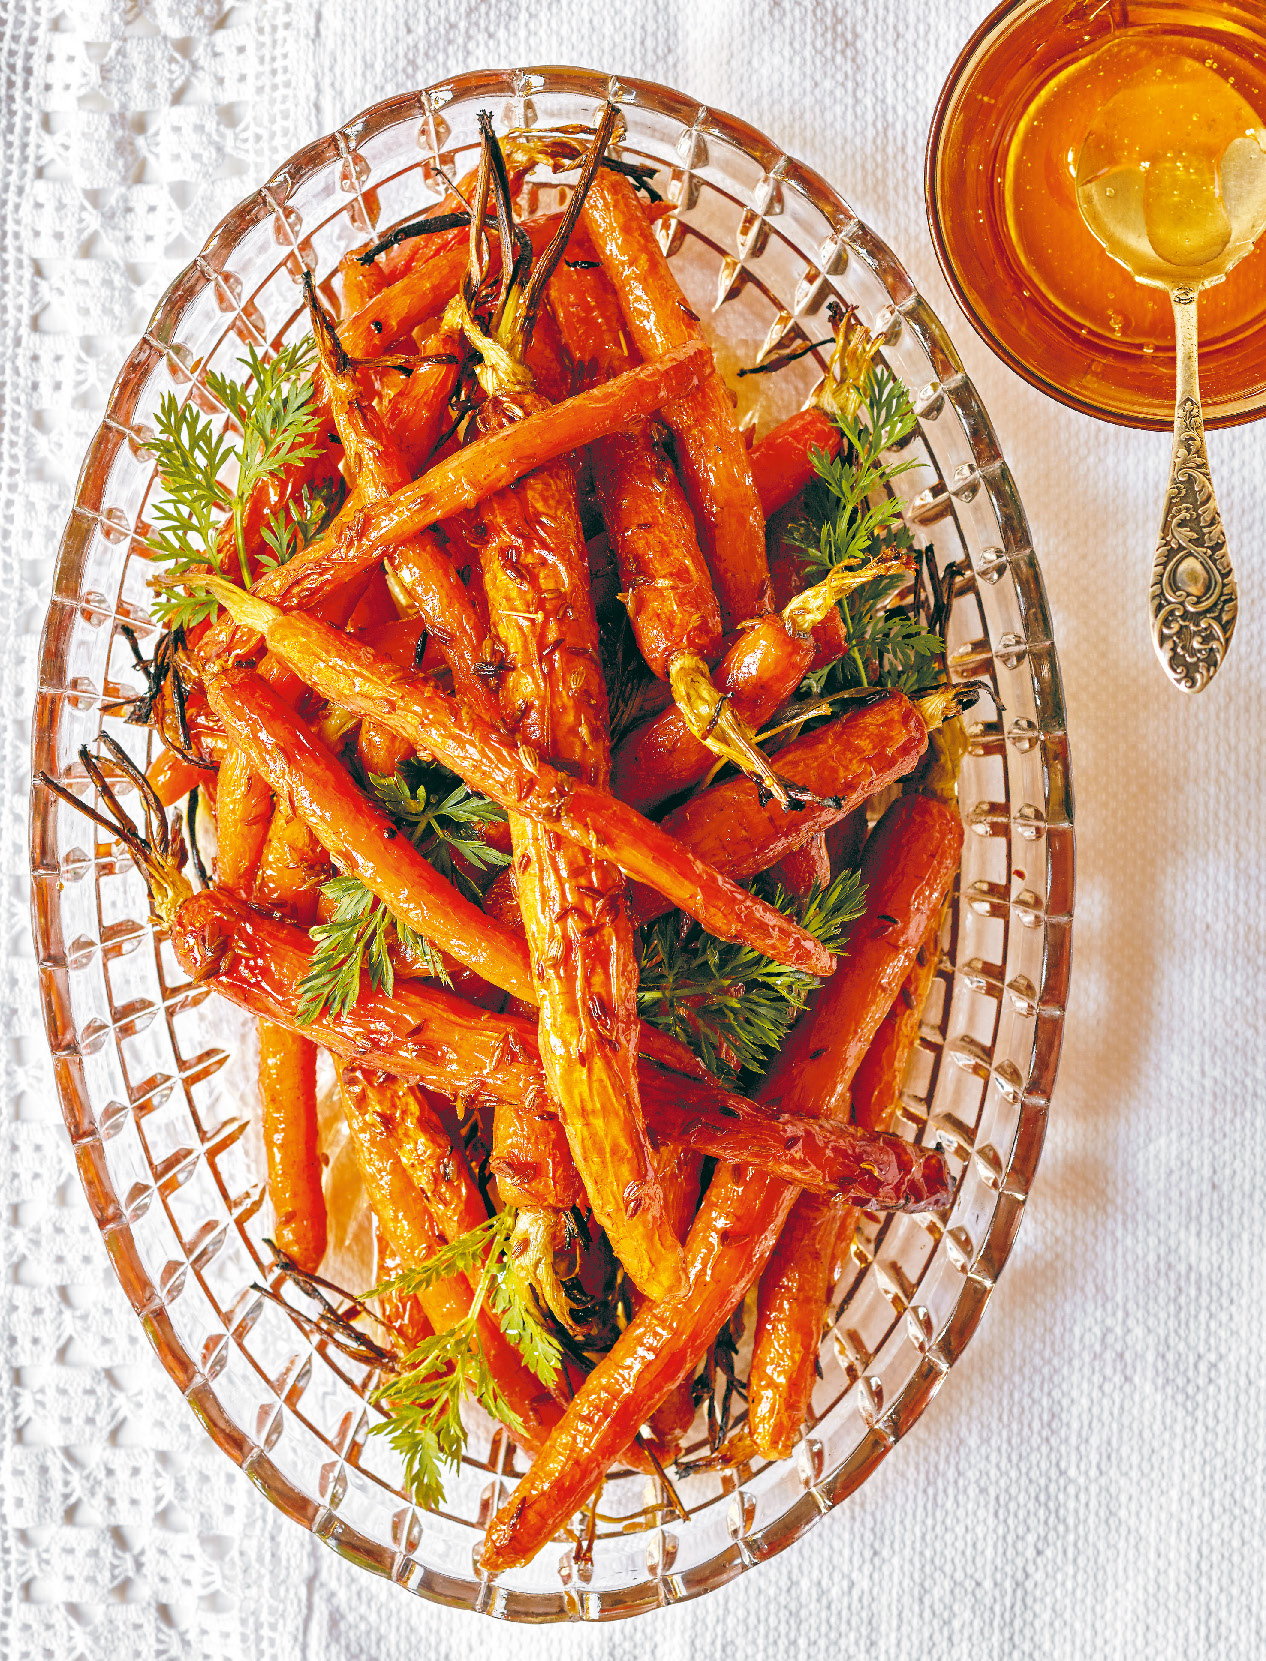 Roasted Dutch carrots with honey and cumin